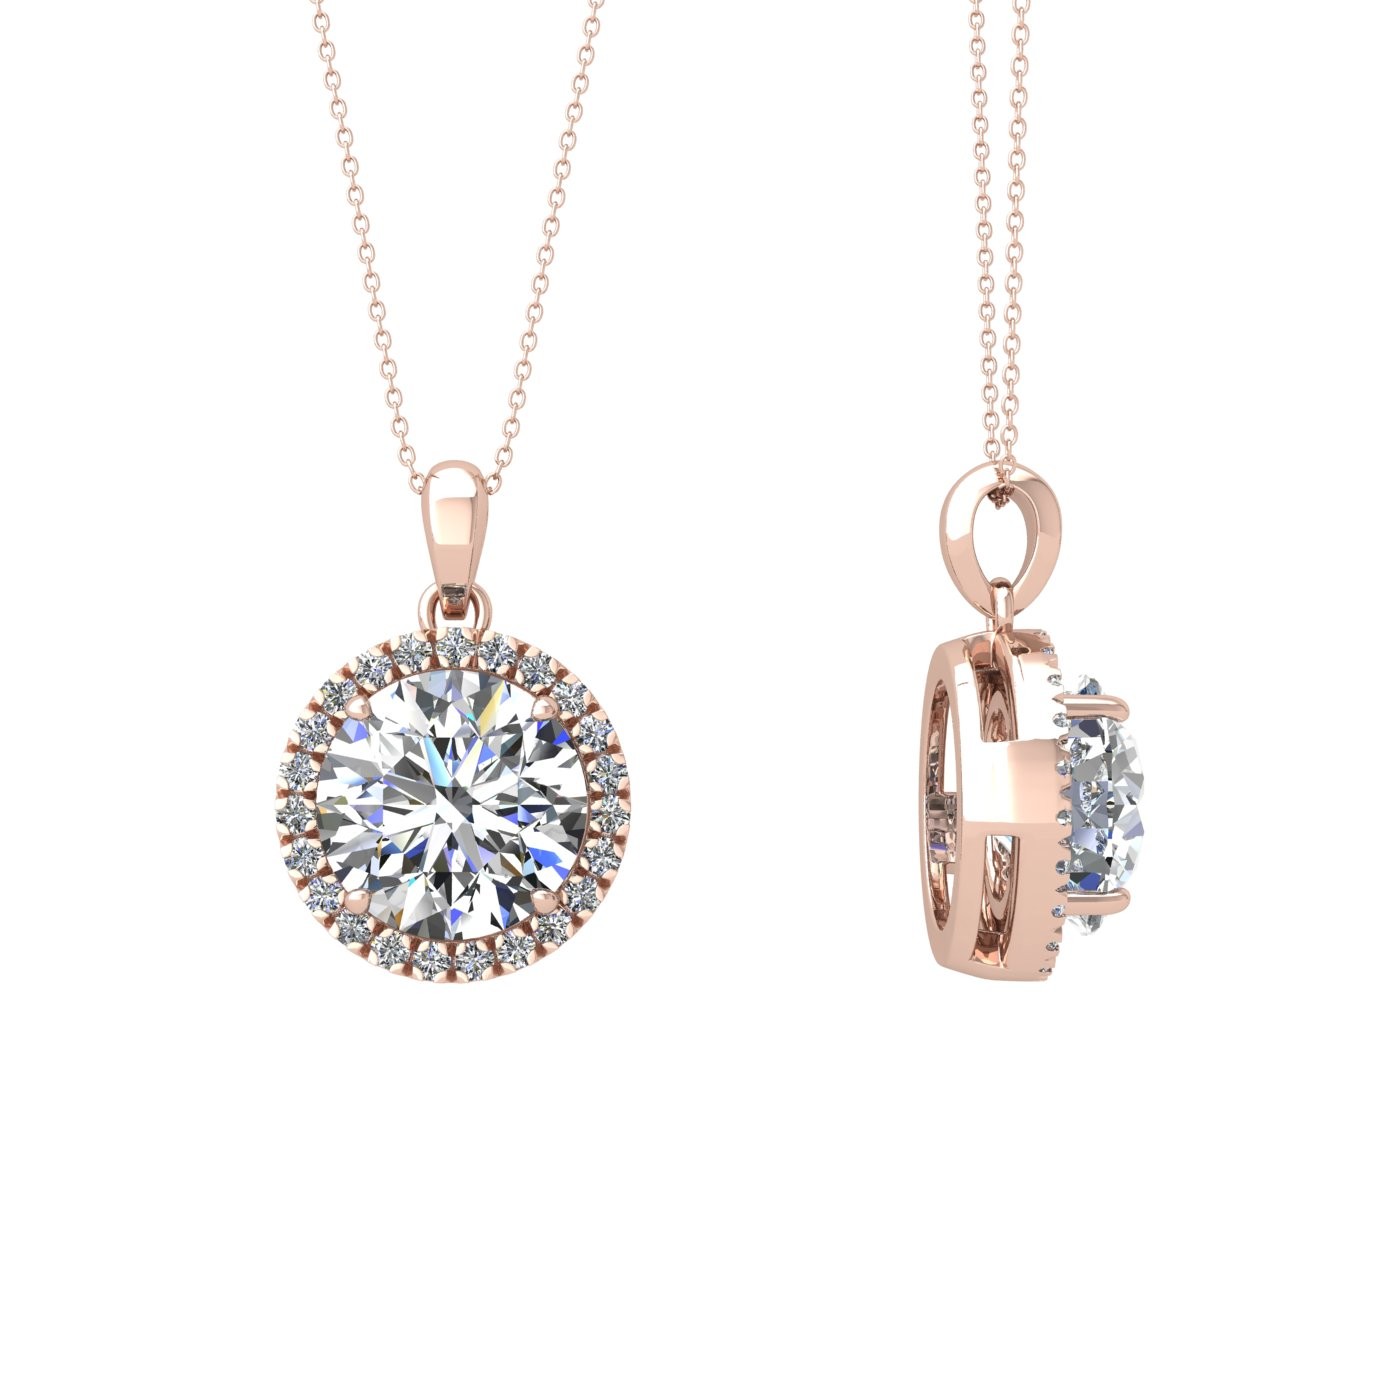 18k rose gold  0,7 ct 4 prong round shape diamond pendant with diamond pavÉ set halo including chain seperate from the pendant